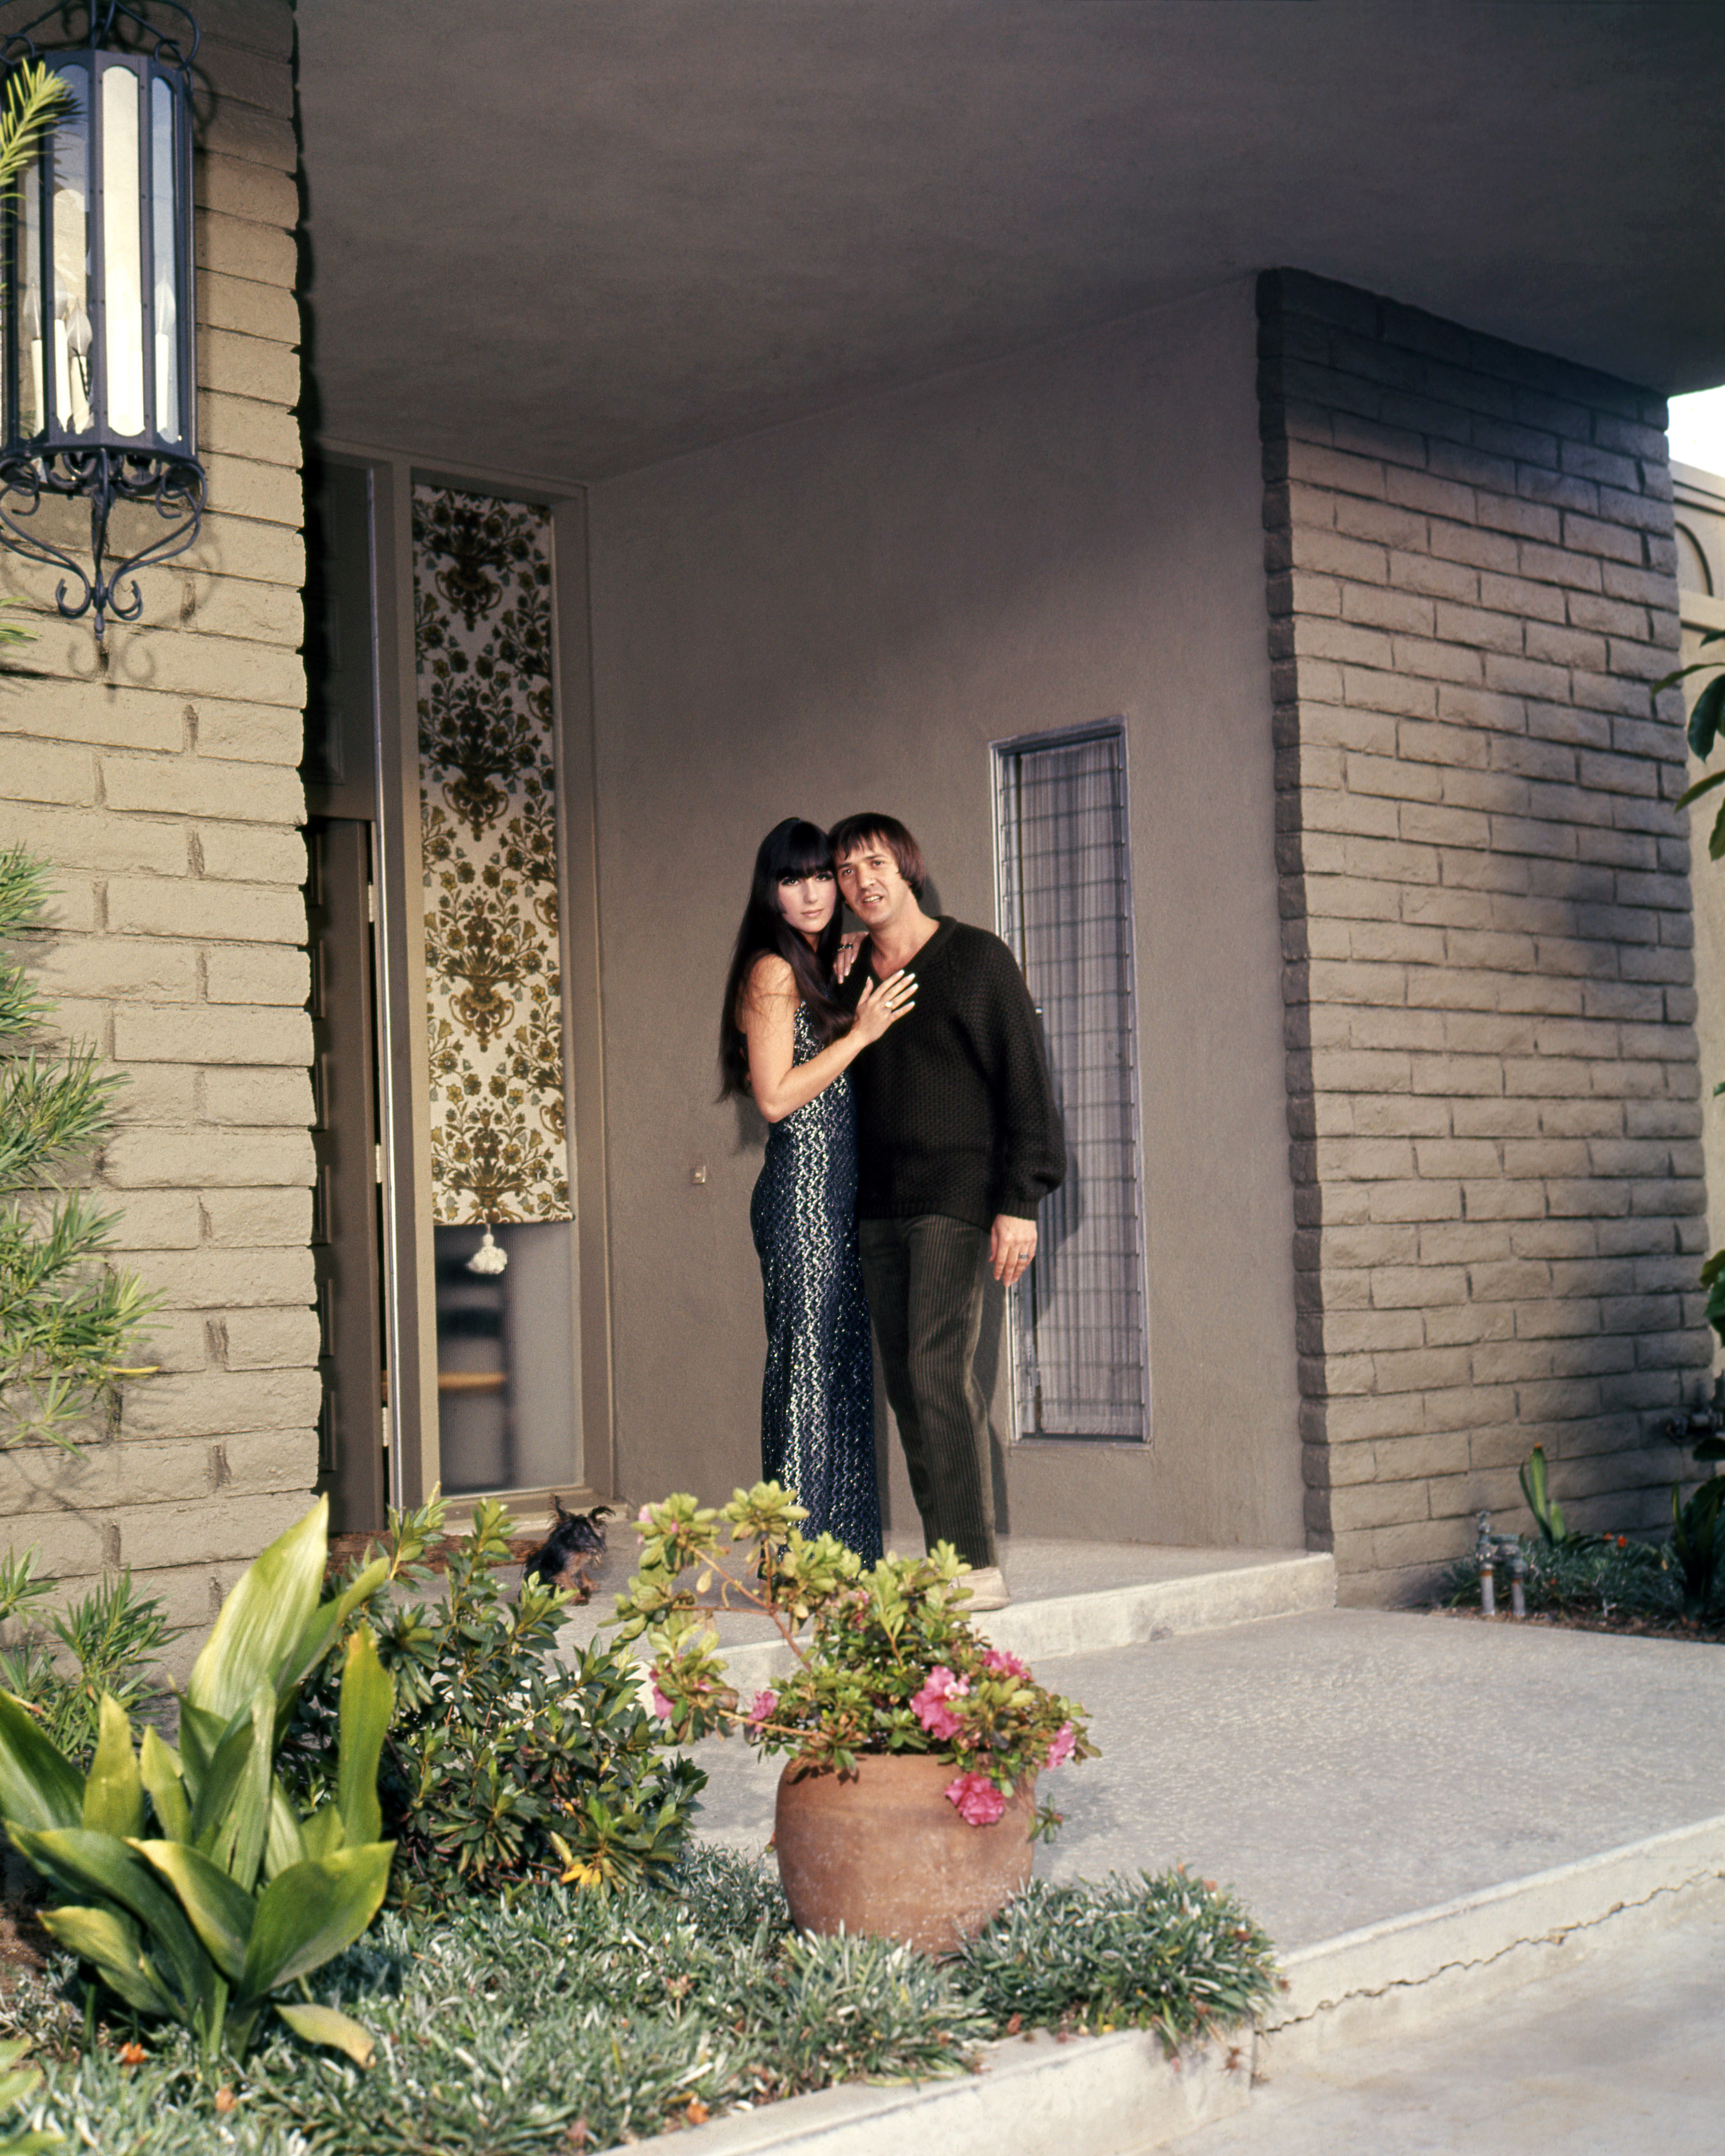 Cher and Sonny out side of their Encino, Calif home Getty Images